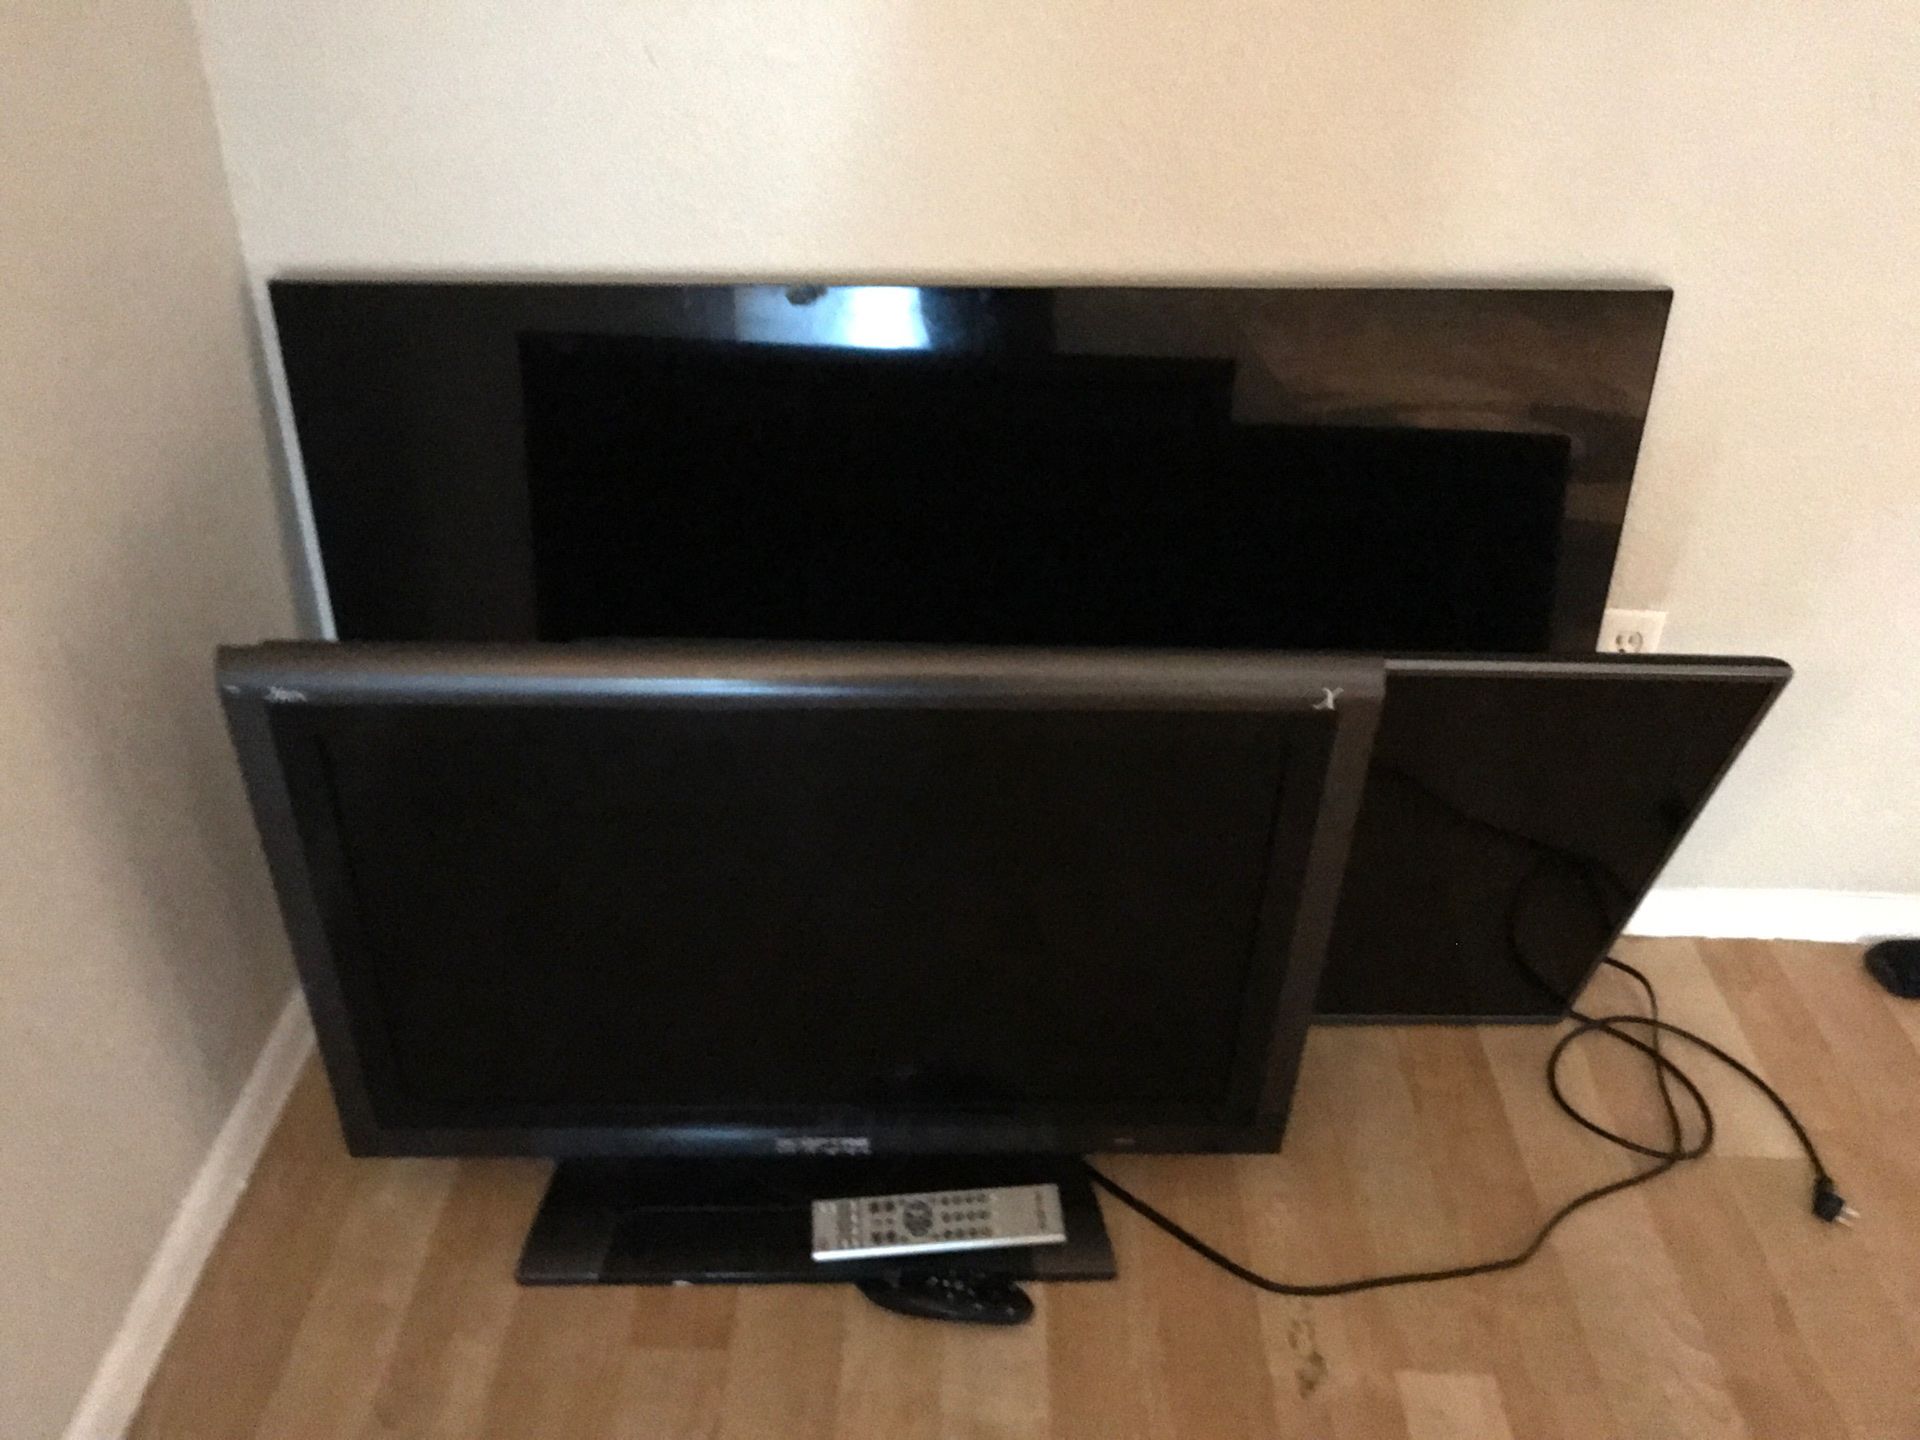 2 Lg TVs one 40 inch one 60inch smart lg Tv with remote 1 sceptre Tv 30 inch Works like New all 3 for 110$ ]**READ DESCRIPTION]**